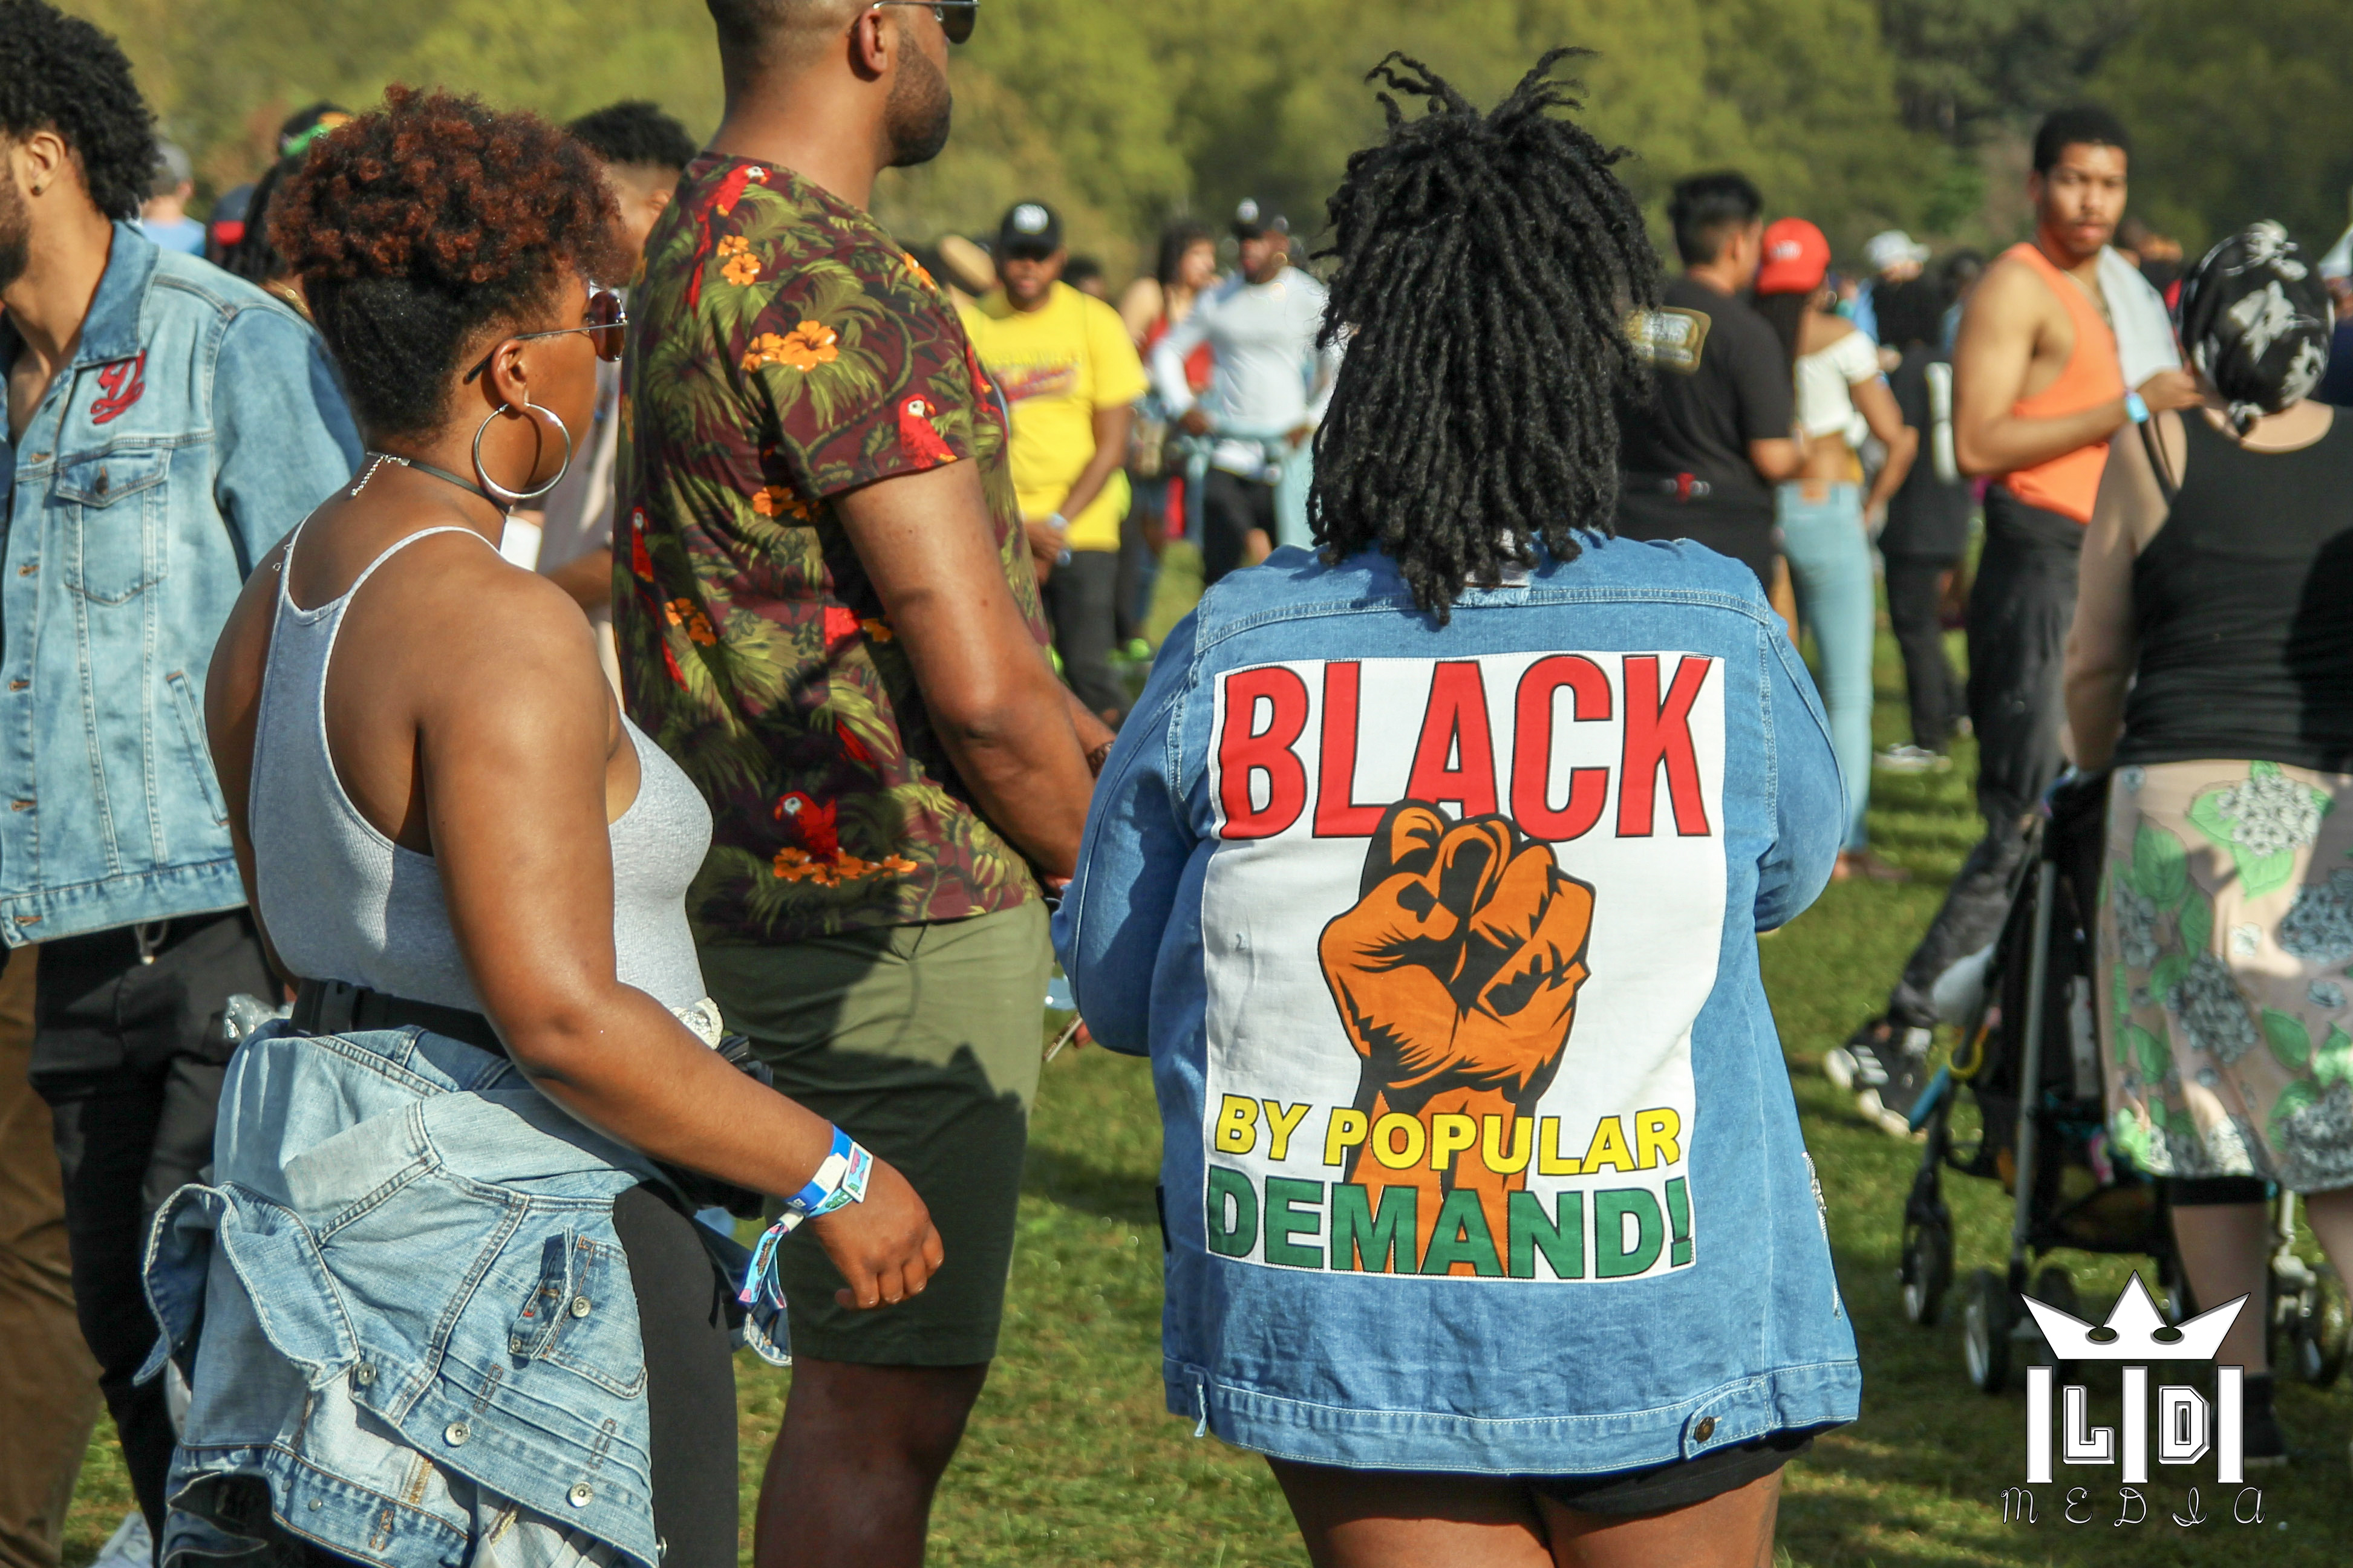 Gallery] Dreamville Festival Brought An Eclectic Mix Of Fashions